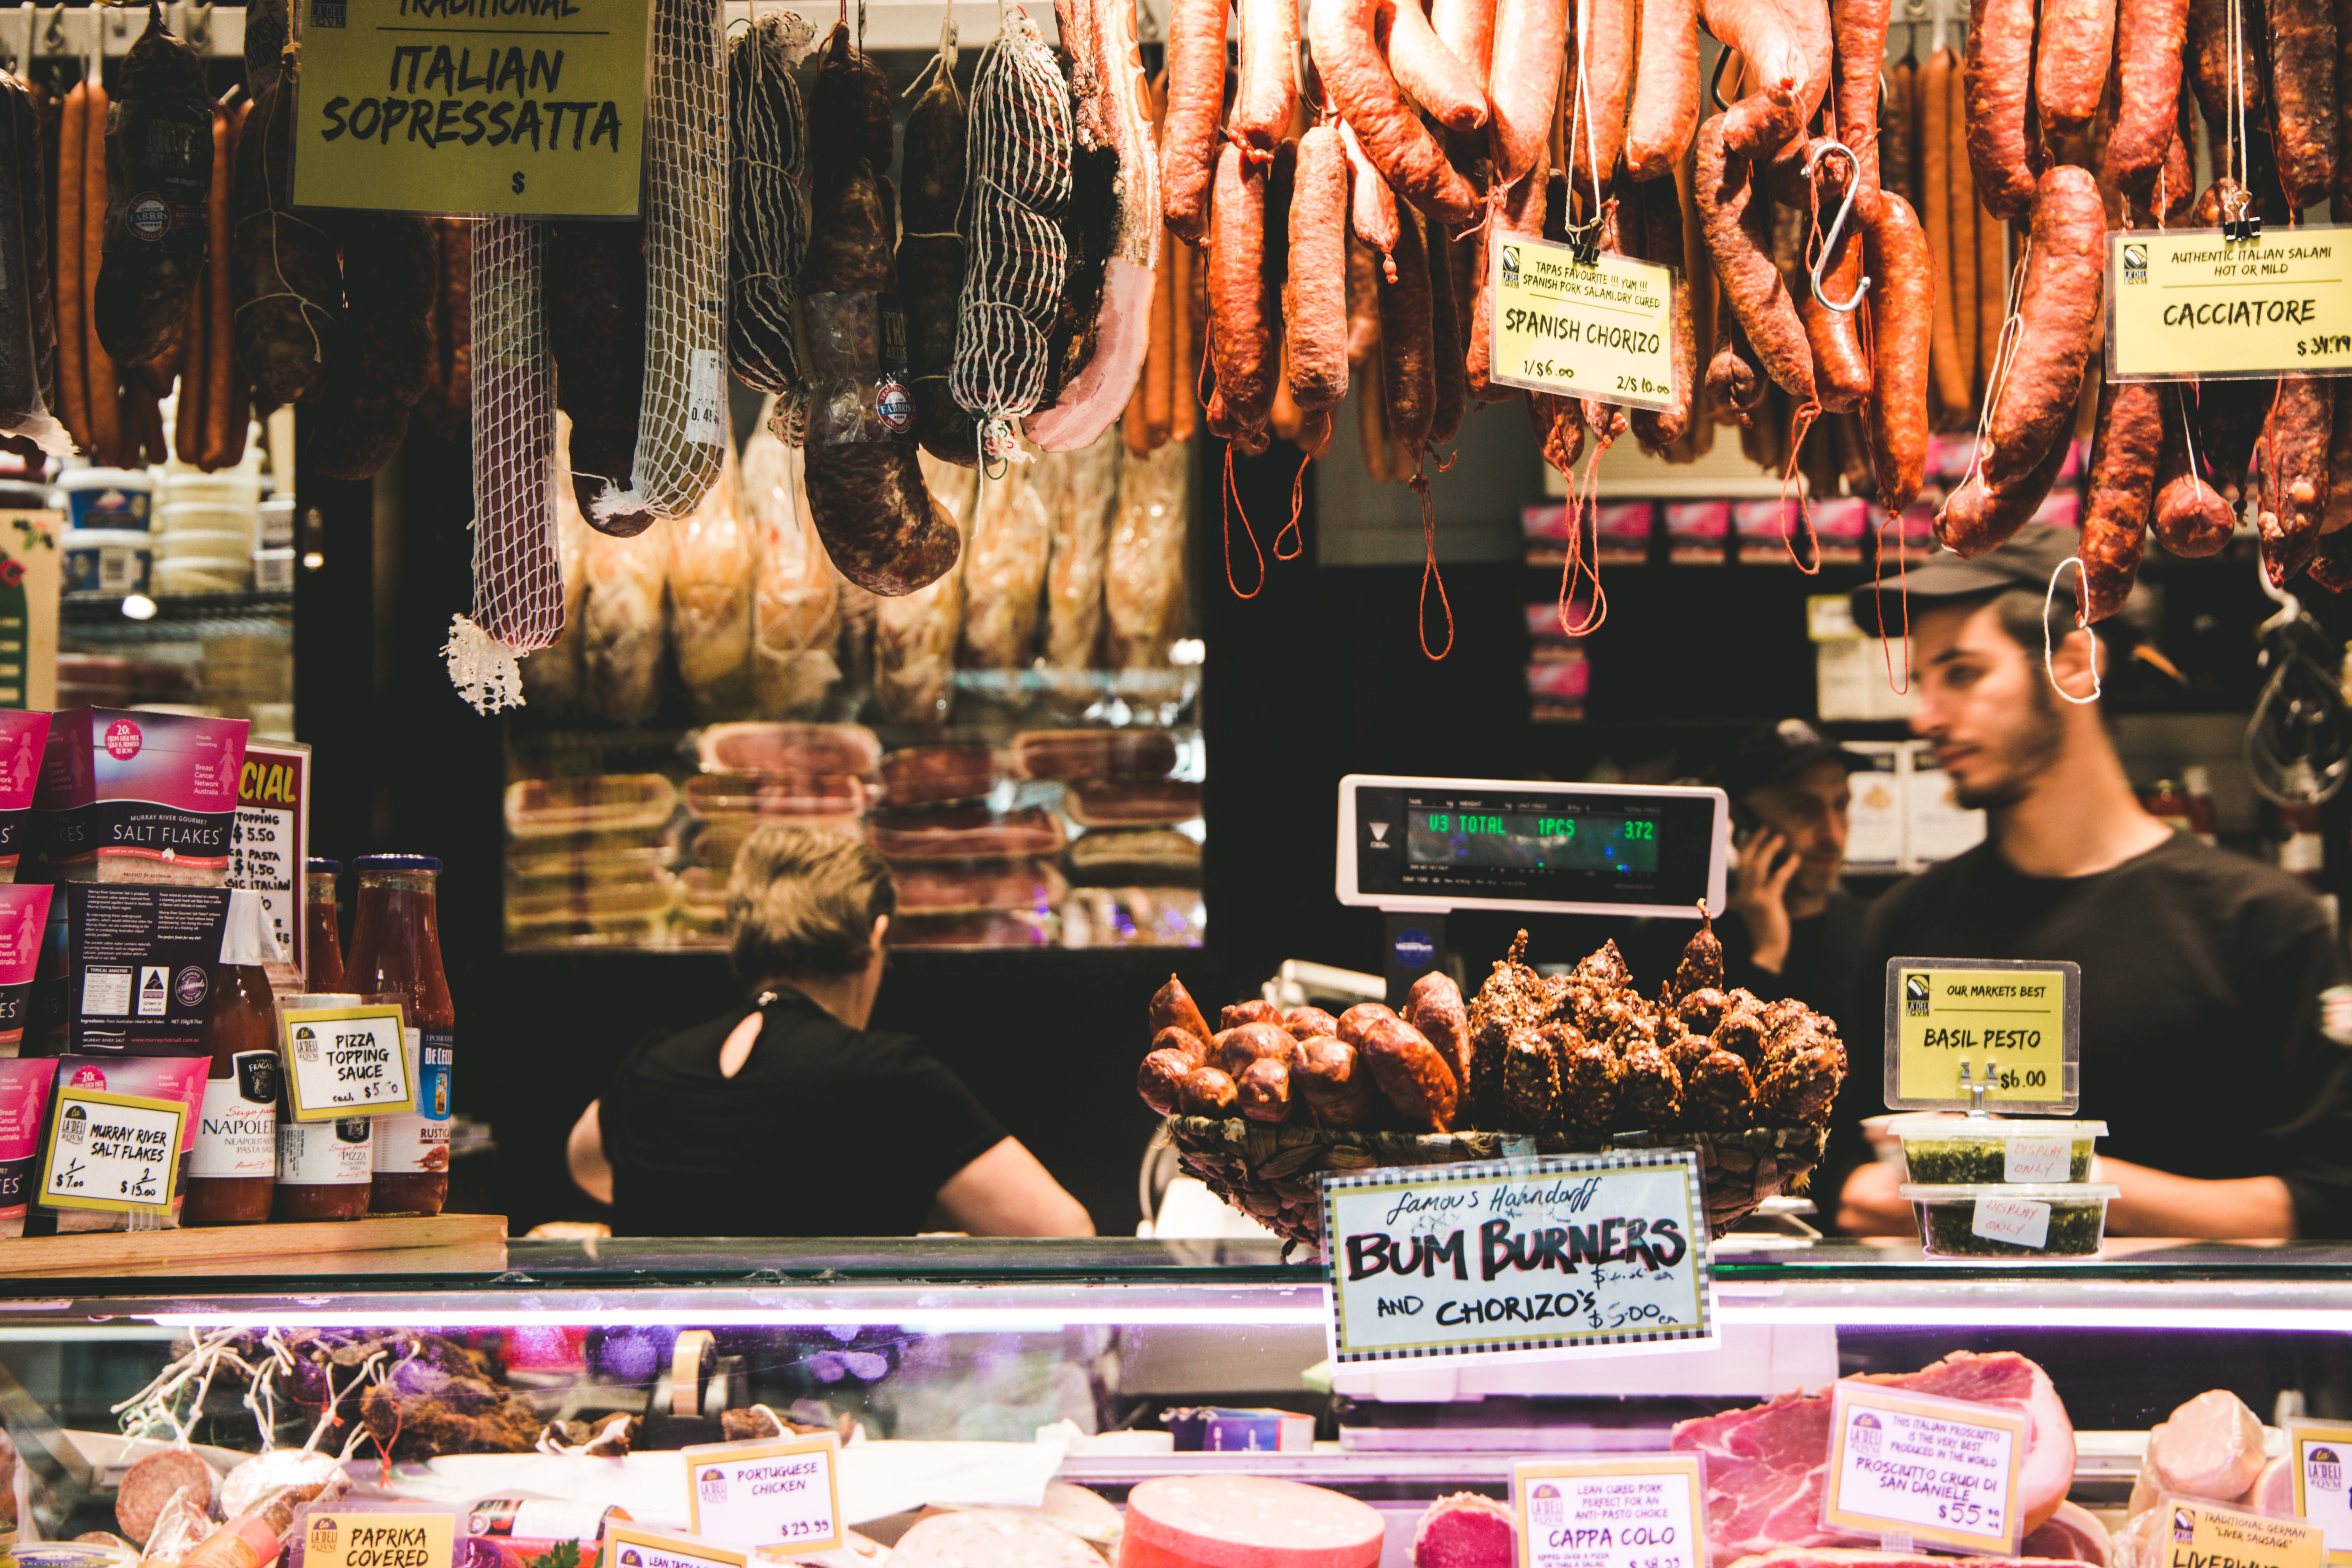 An image of one of the meet stalls at Melbourne Queen Victoria Market